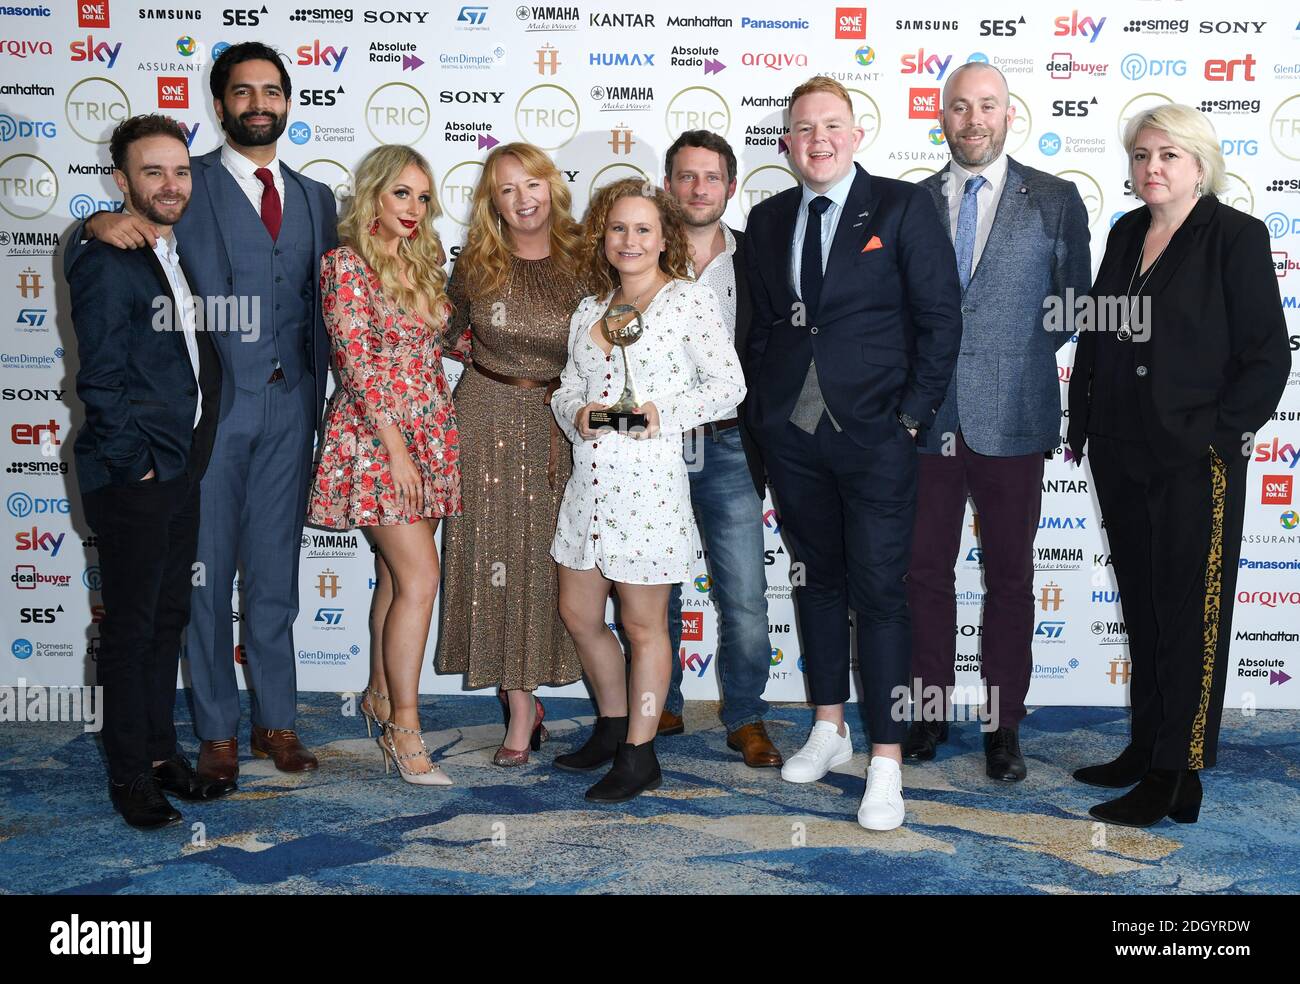 The cast of Coronation Street with the award for Soap of the Year Sponsored by Assurant. Jack P. Shepherd, Charlie De Melo, Sally Ann Matthews, Dolly-Rose Campbell, Colson Smith and Peter Ash (left to right) attending the TRIC Awards 2020 held at the Grosvenor Hotel, London. Picture credit should read: Doug Peters/EMPICS Stock Photo